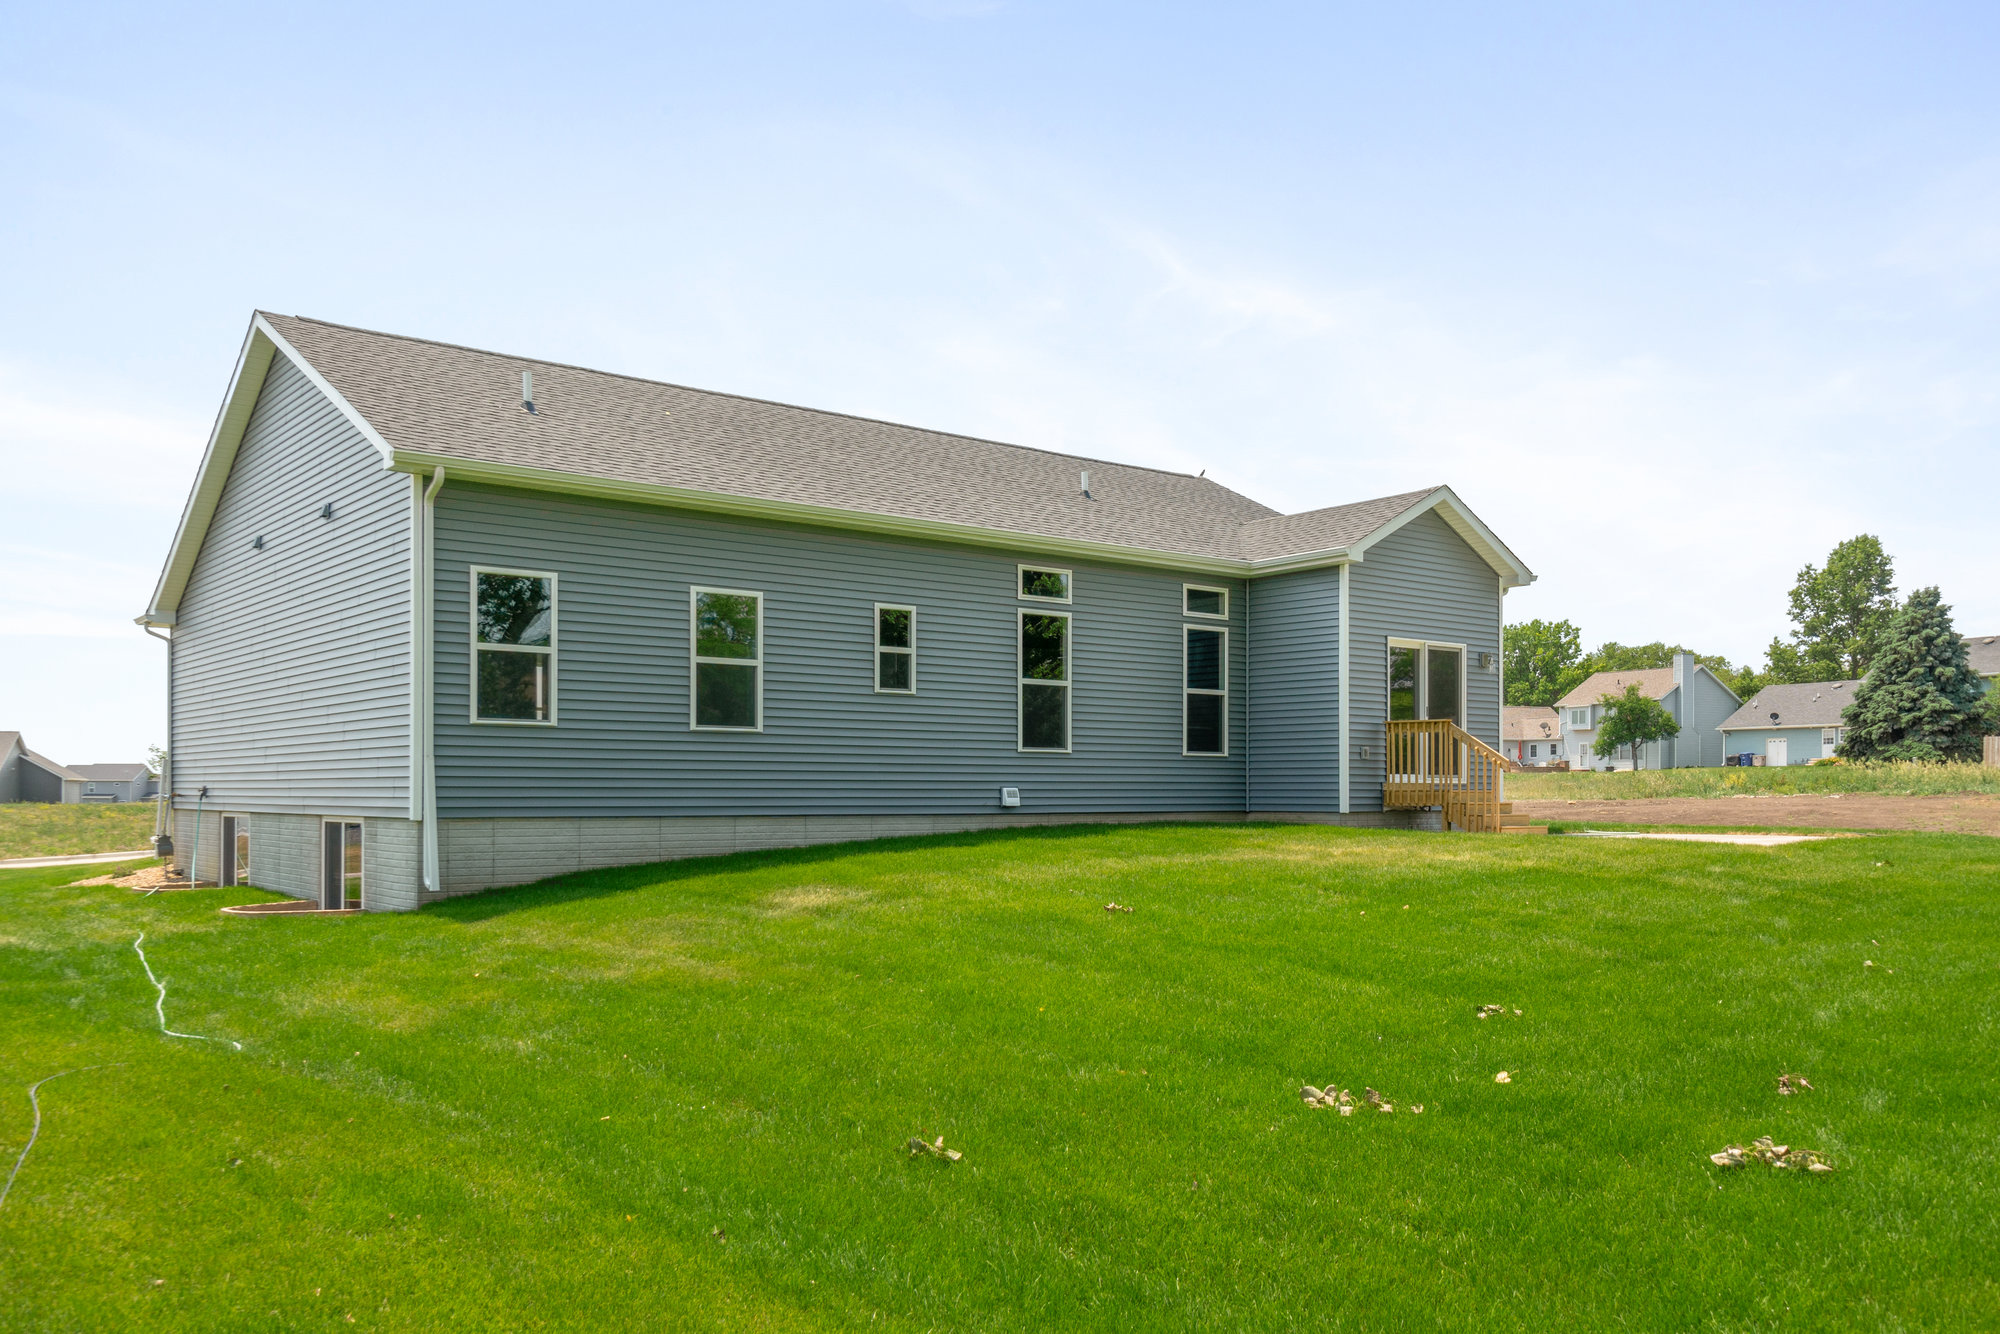 Craftsmanship Qualities Found Throughout this New Construction Ranch Home in Waterloo Iowa - 122 Sunbird Ct., Waterloo